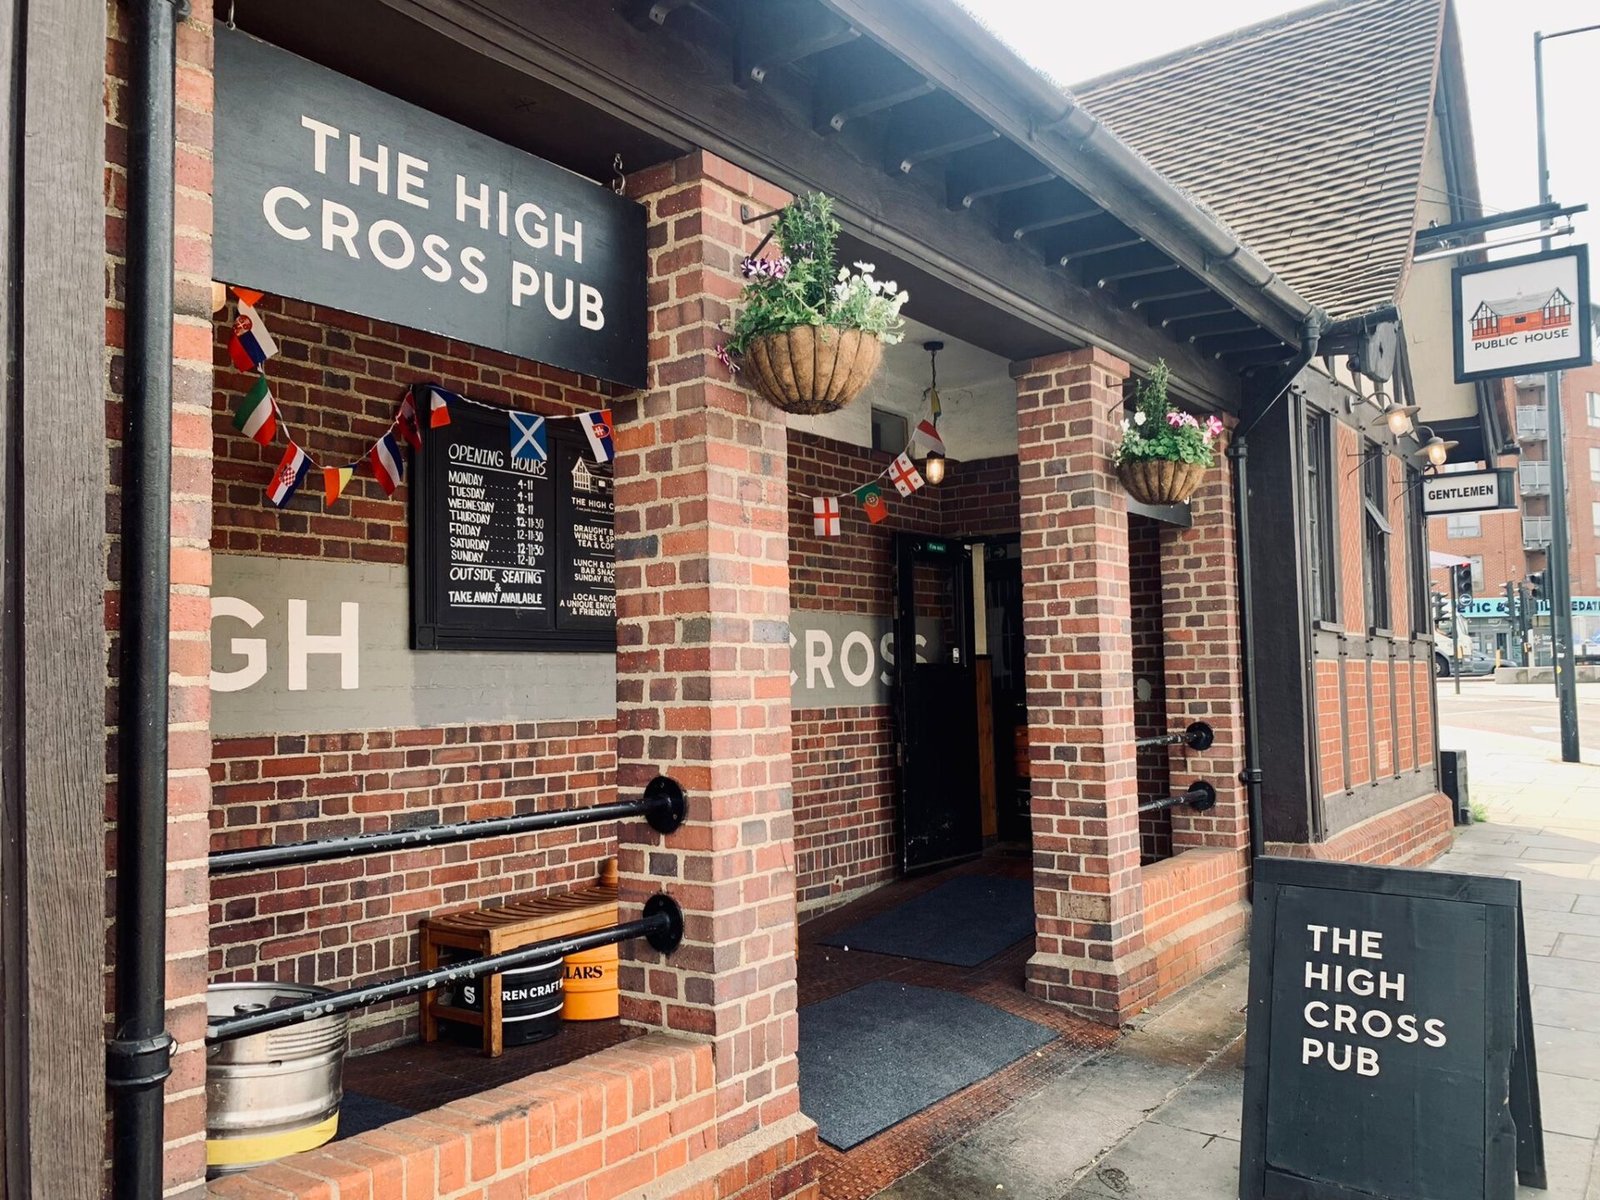 The High Cross Pub in Tottenham, a cozy spot in a former public toilet, perfect for watching the Euros with great pints, delicious food, and a unique charm.